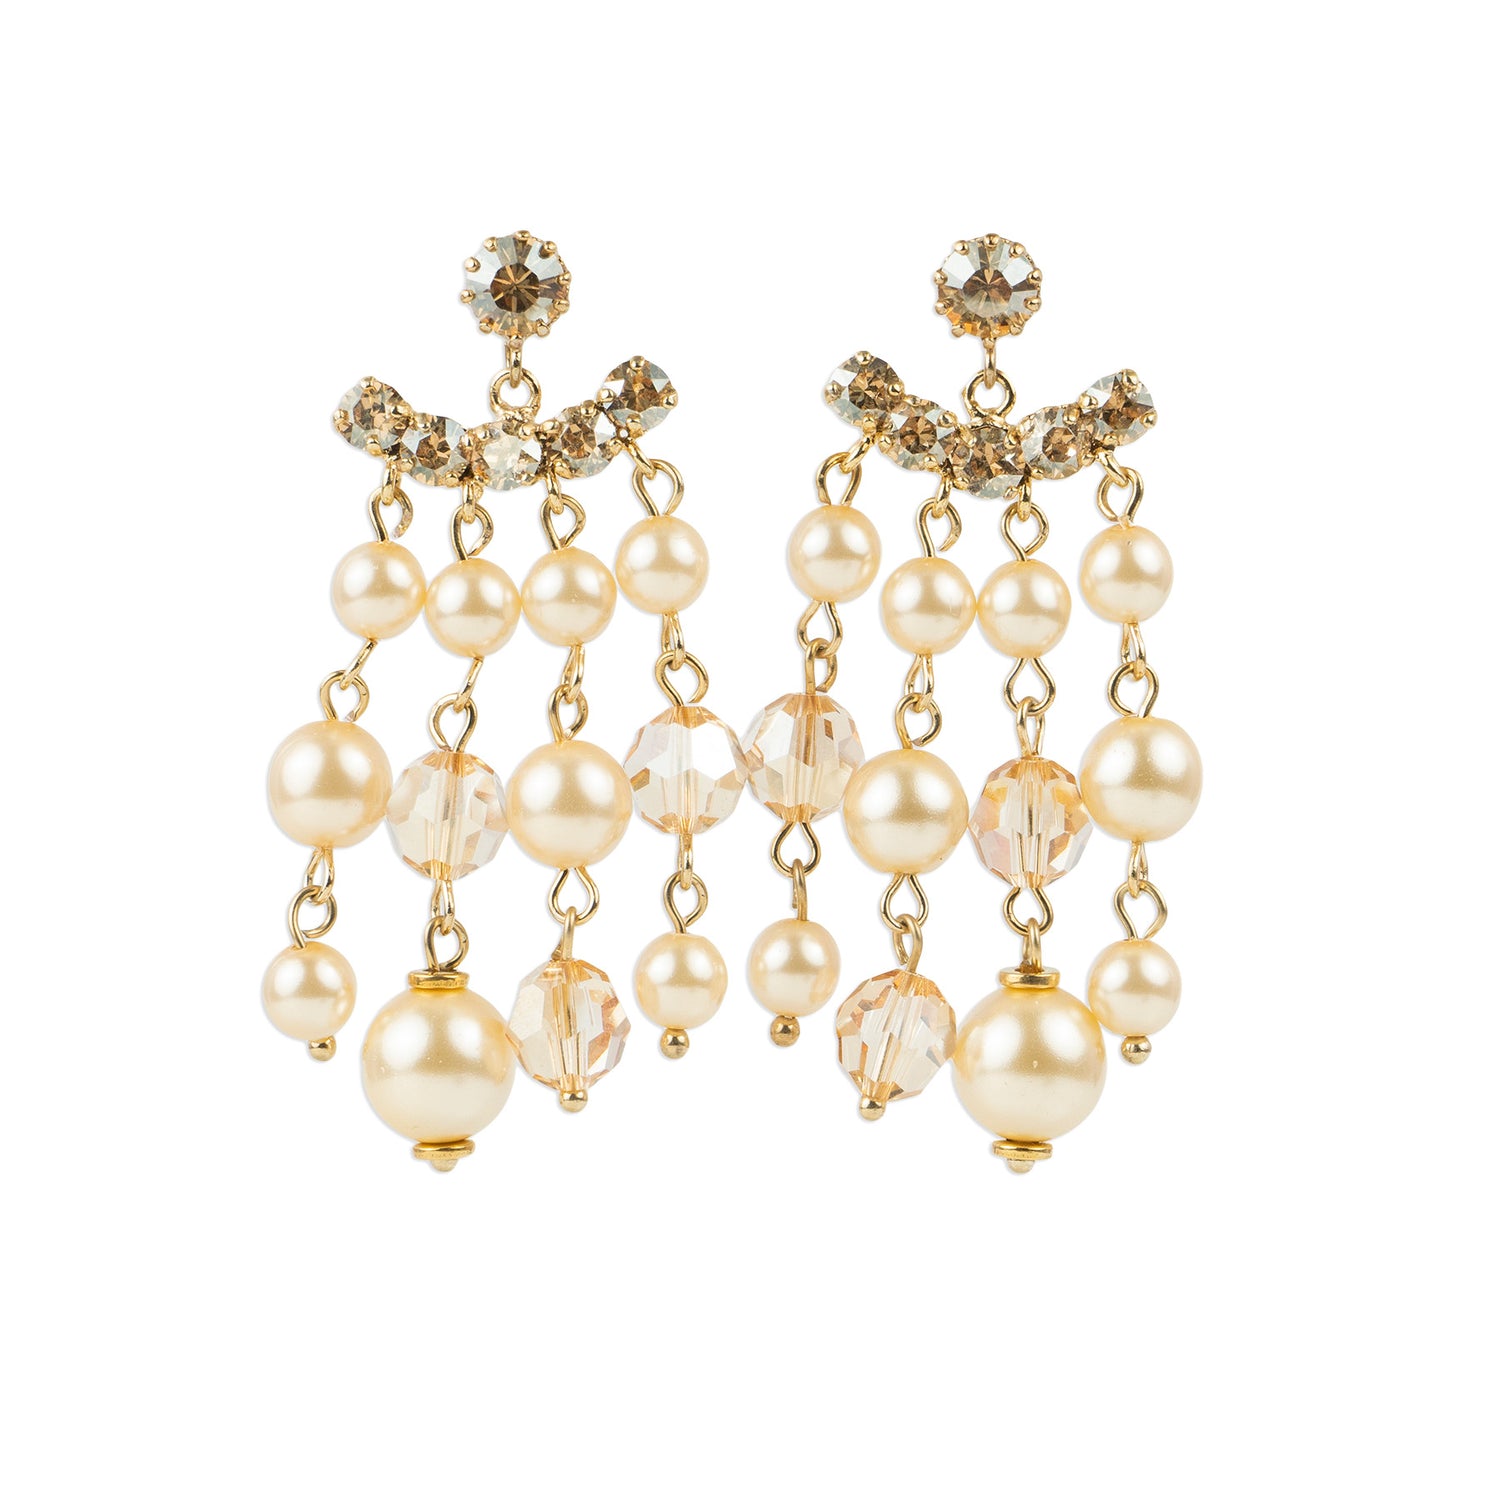 Cascading pearl and Swarovski crystal pendant earrings